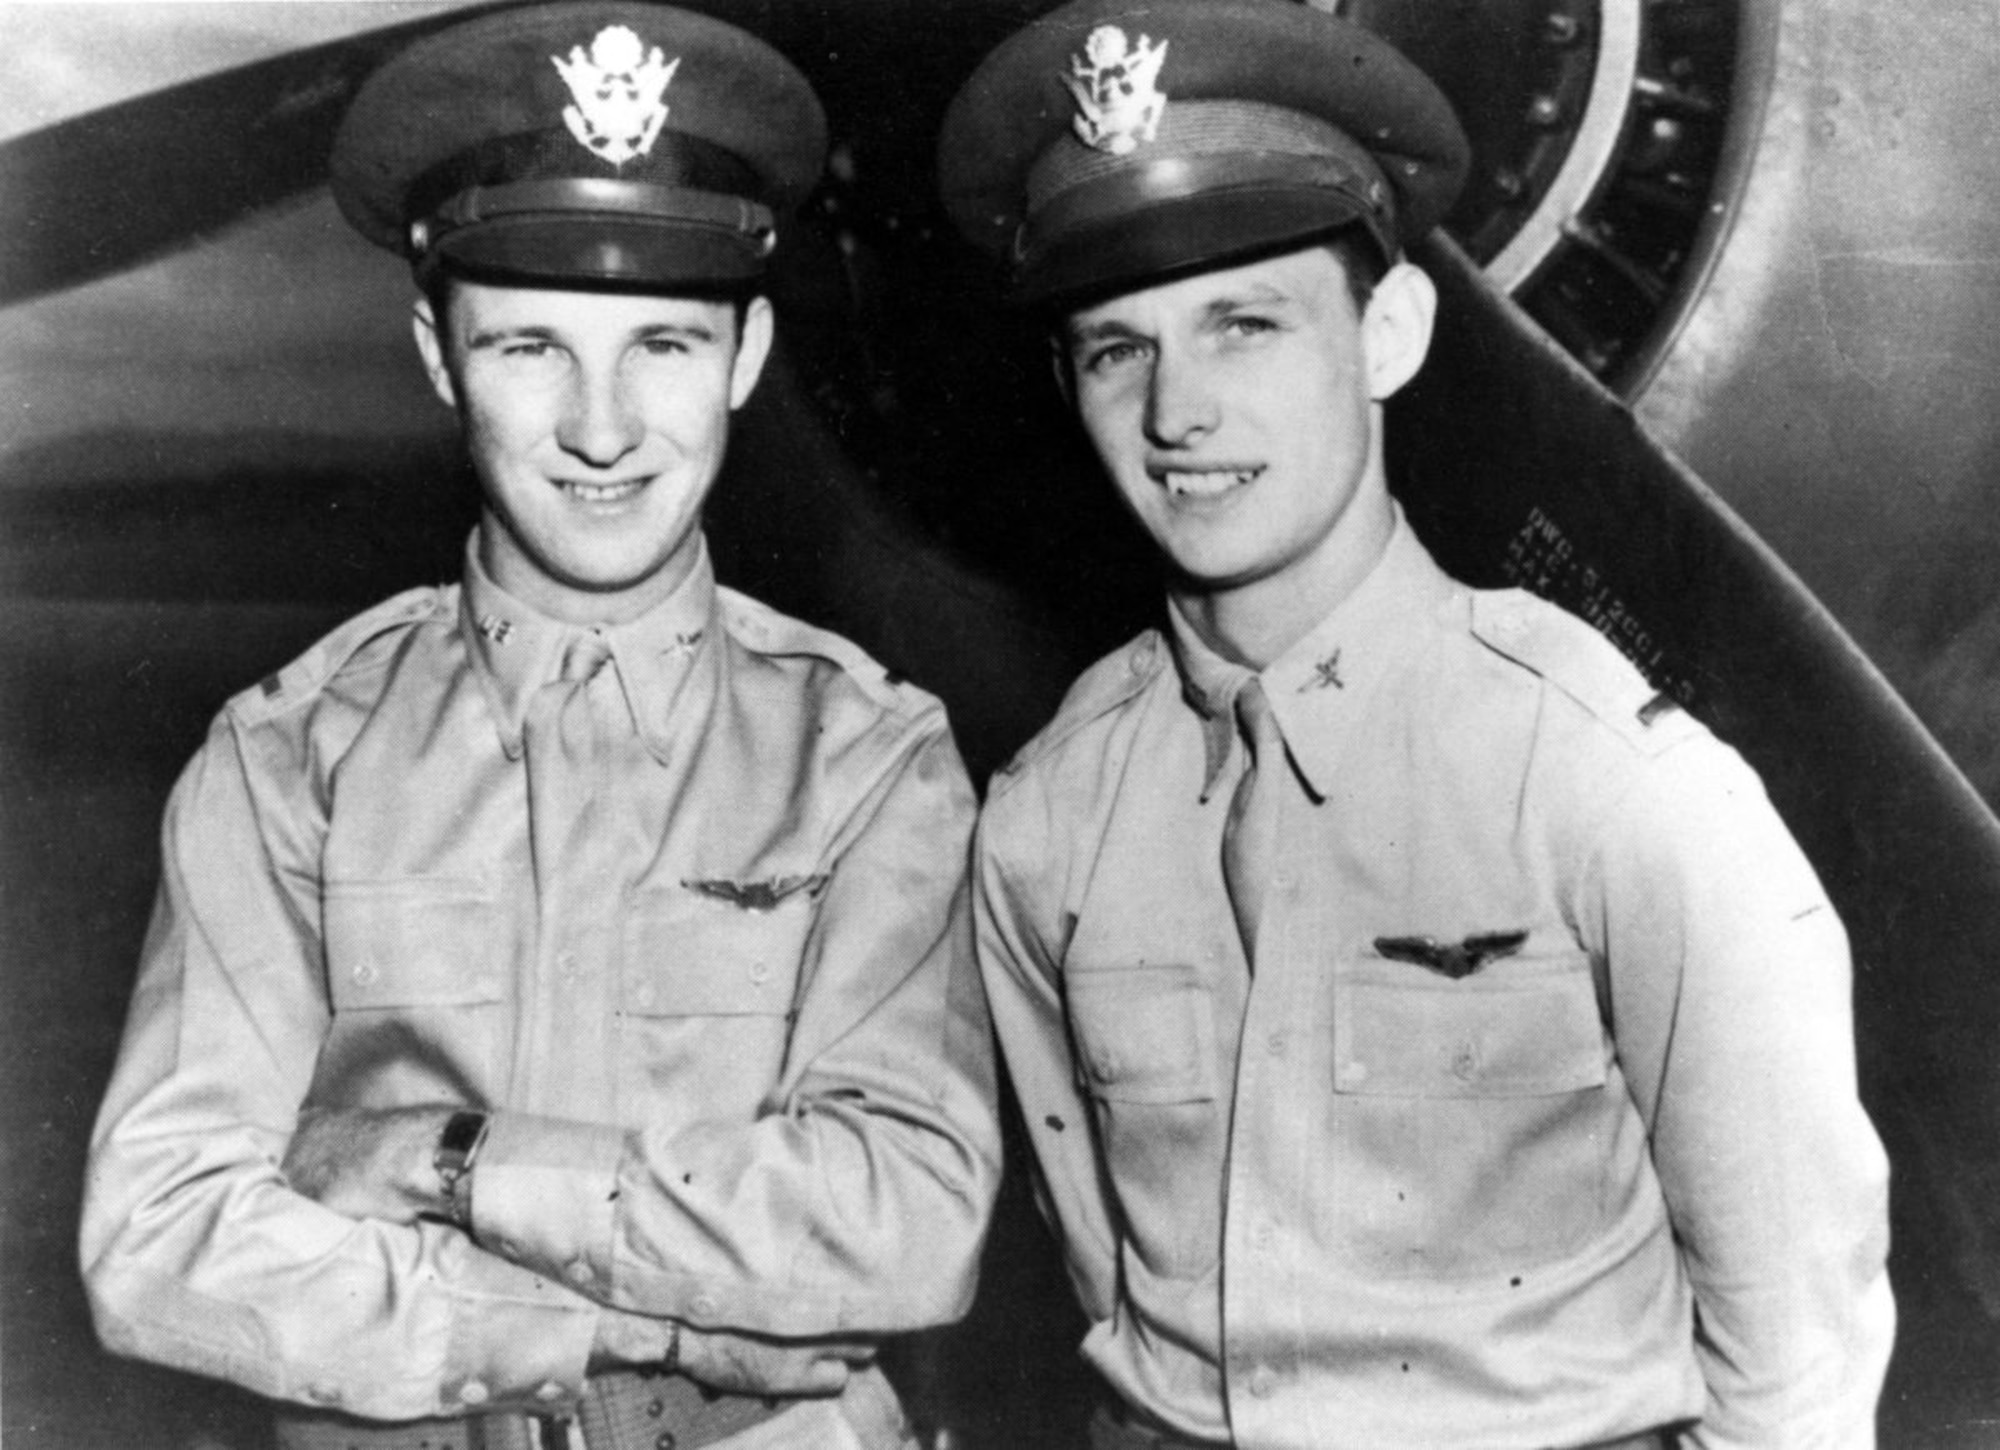 Two members of the 47th Pursuit Squadron, now the 47th Fighter Squadron, which was attached to Wheeler Field came to this very conclusion. 2nd Lieutenants George Welch and Kenneth Taylor, Army Air Corps pilots, had just arrived to their first duty station on Hawaii less than a year prior .